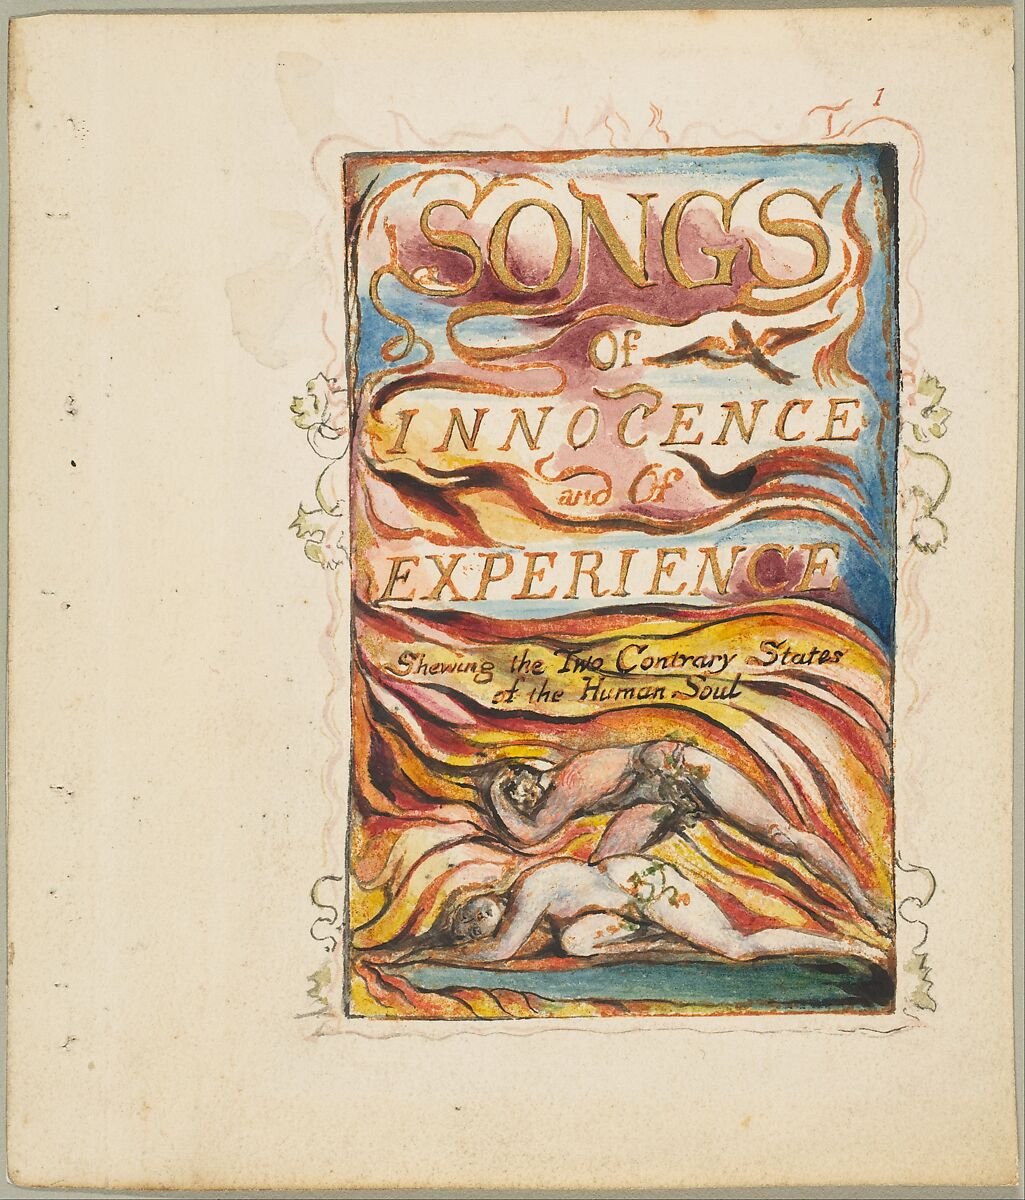 Songs of Innocence and of Experience, Shewing the Two Contrary States of the Human Soul: Combined Title-page, William Blake, Relief etching printed in orange-brown ink and hand-colored with watercolor and shell gold